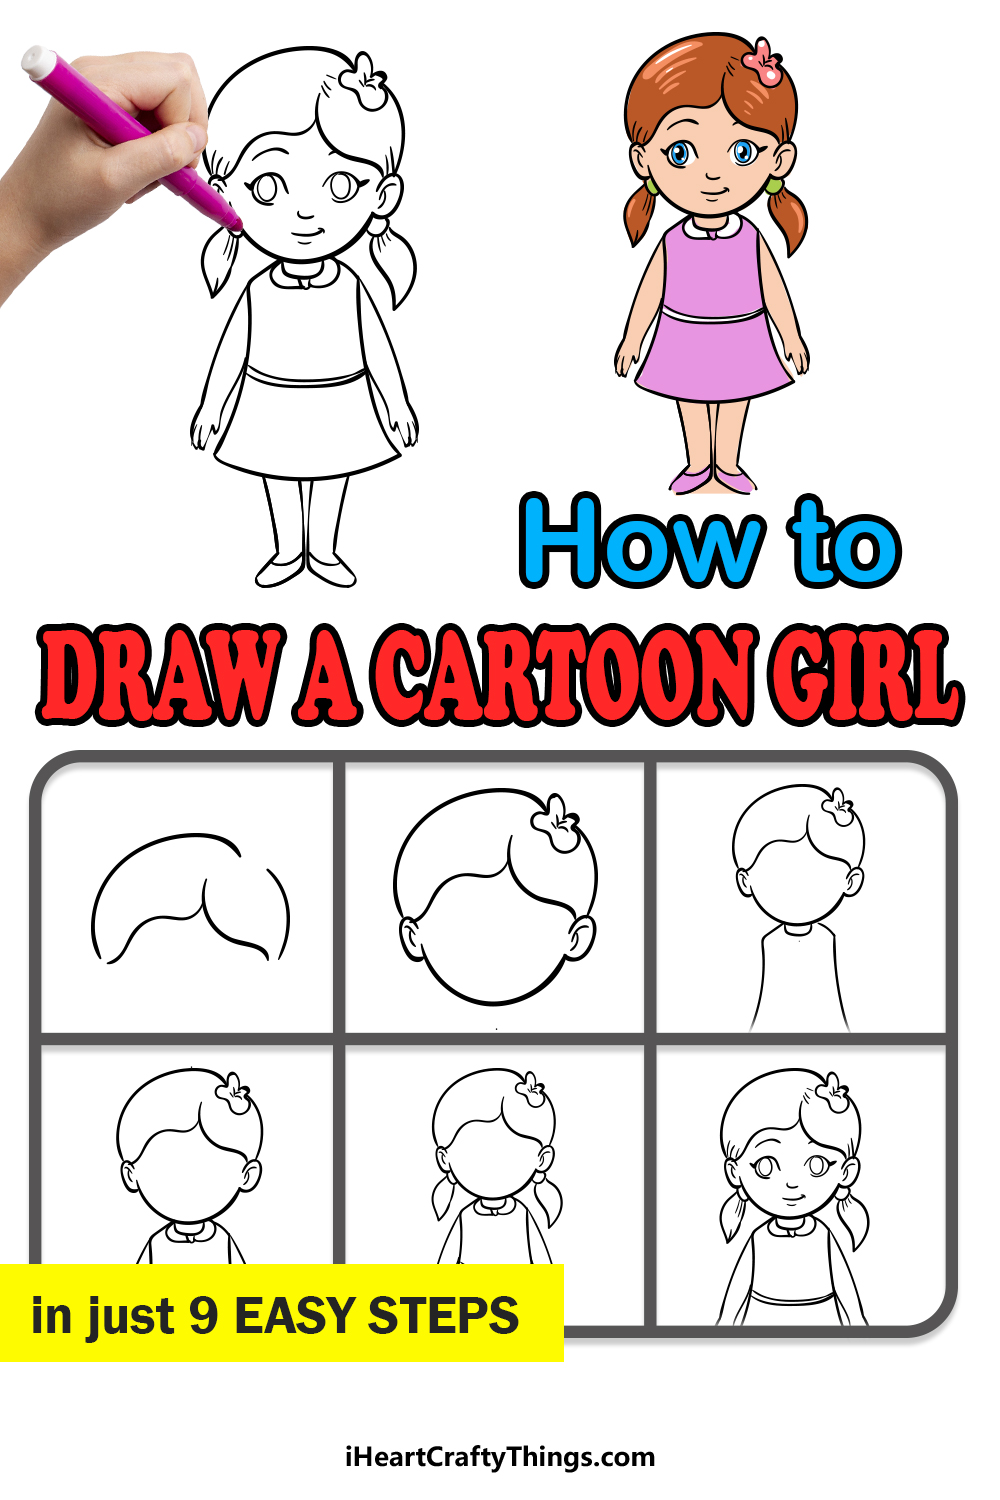 Cartoon Girl Drawing - How To Draw A Cartoon Girl Step By Step